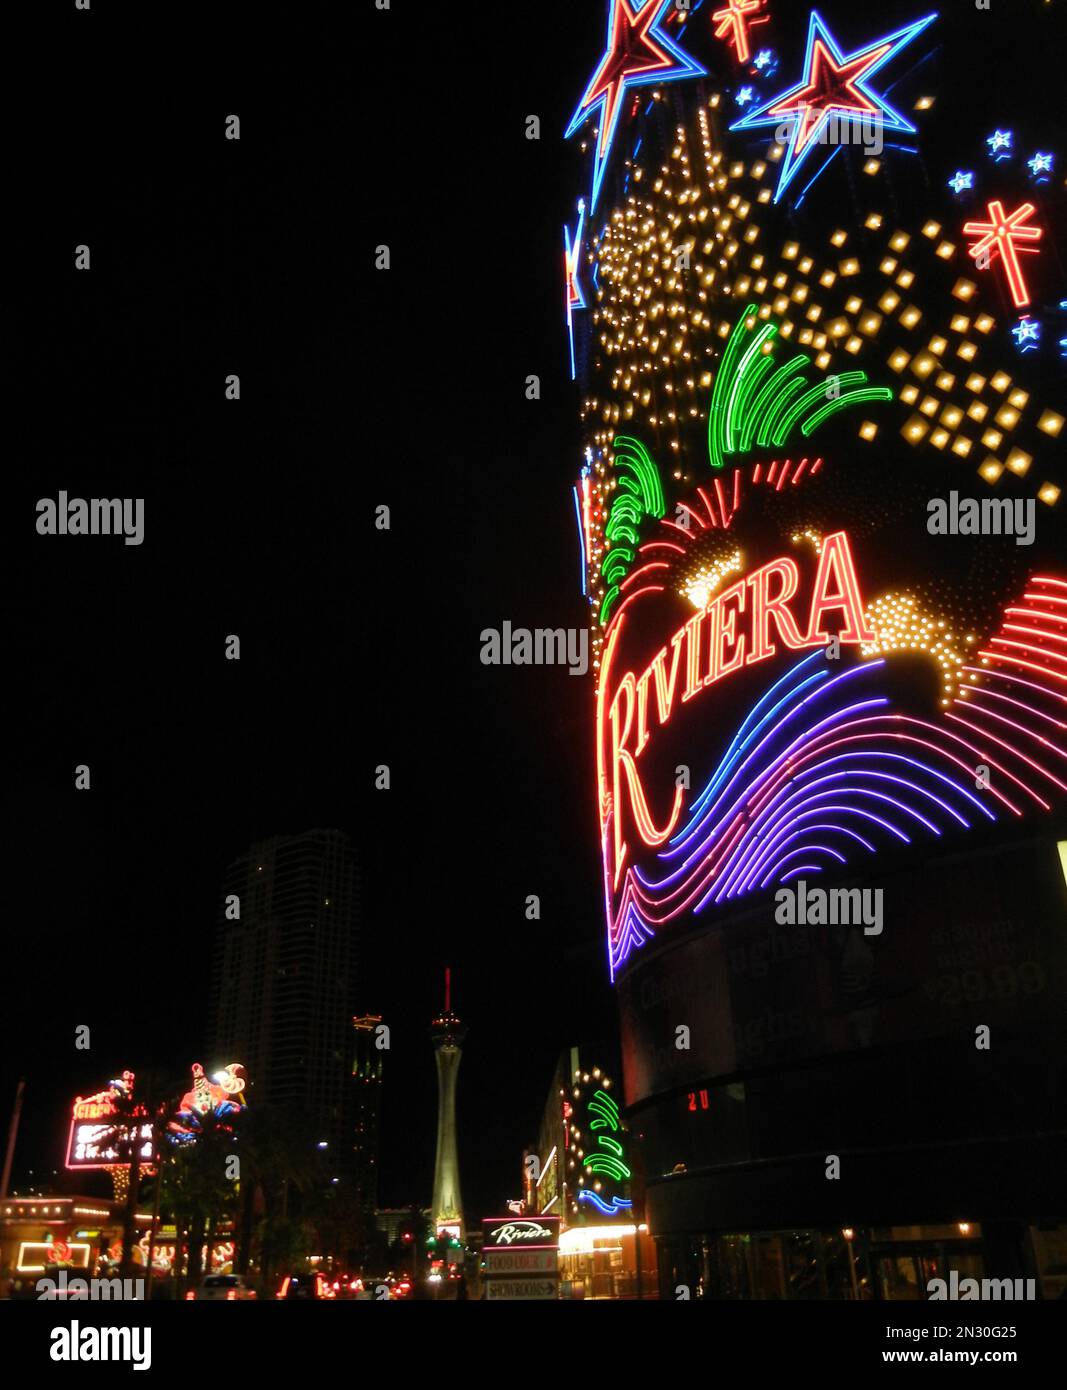 This Feb. 16, 2015 photo shows the Riviera Hotel and Casino on the Las Vegas  Strip. Owners of the hotel which opened in 1955 have agreed to sell the  property to the